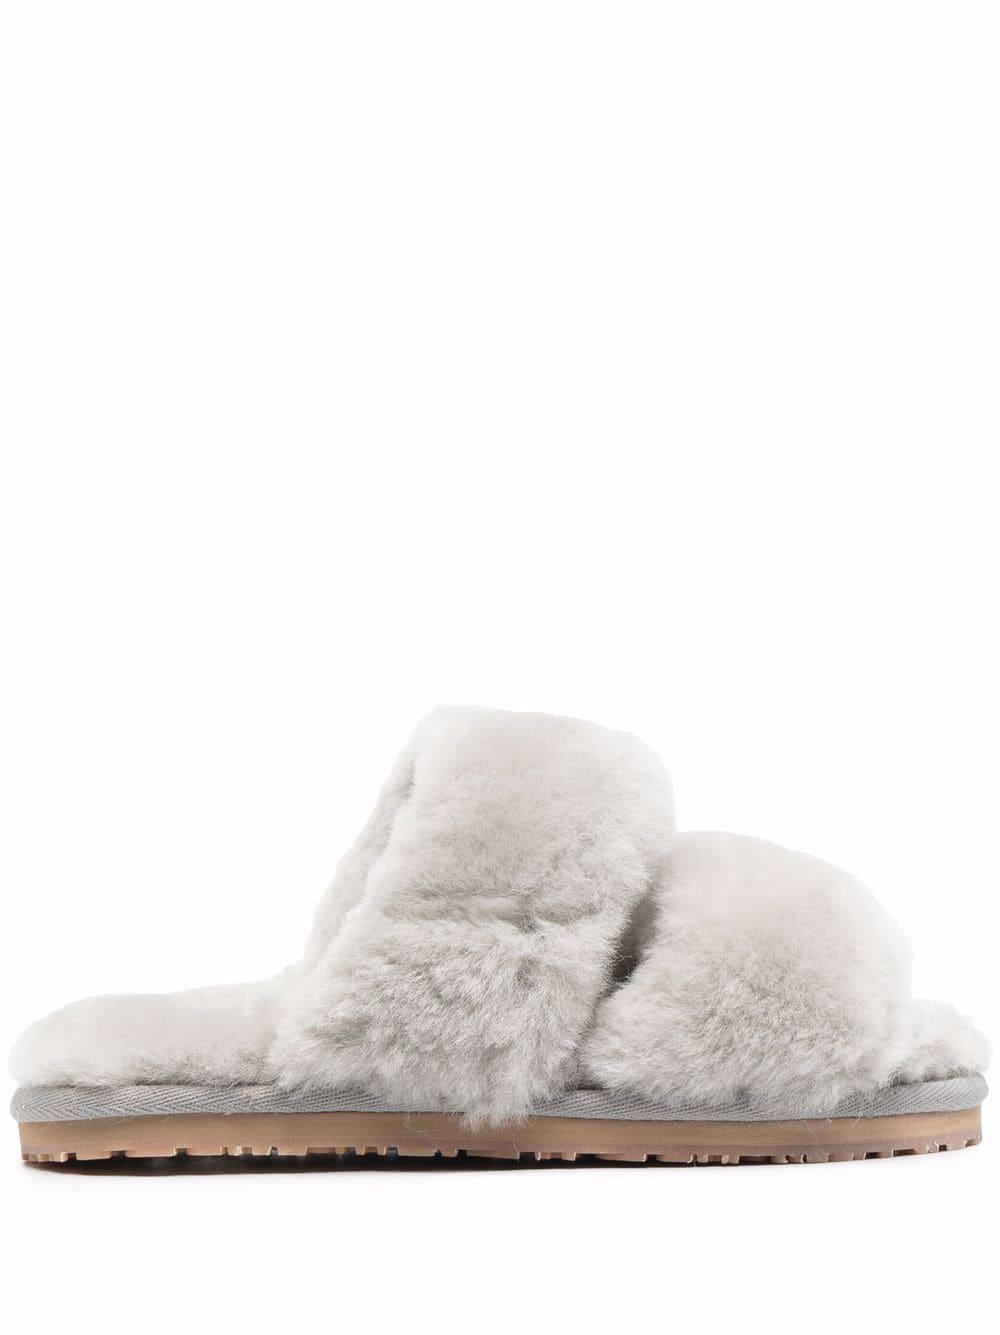 Mou Stripes Shearling Slippers in White | Lyst